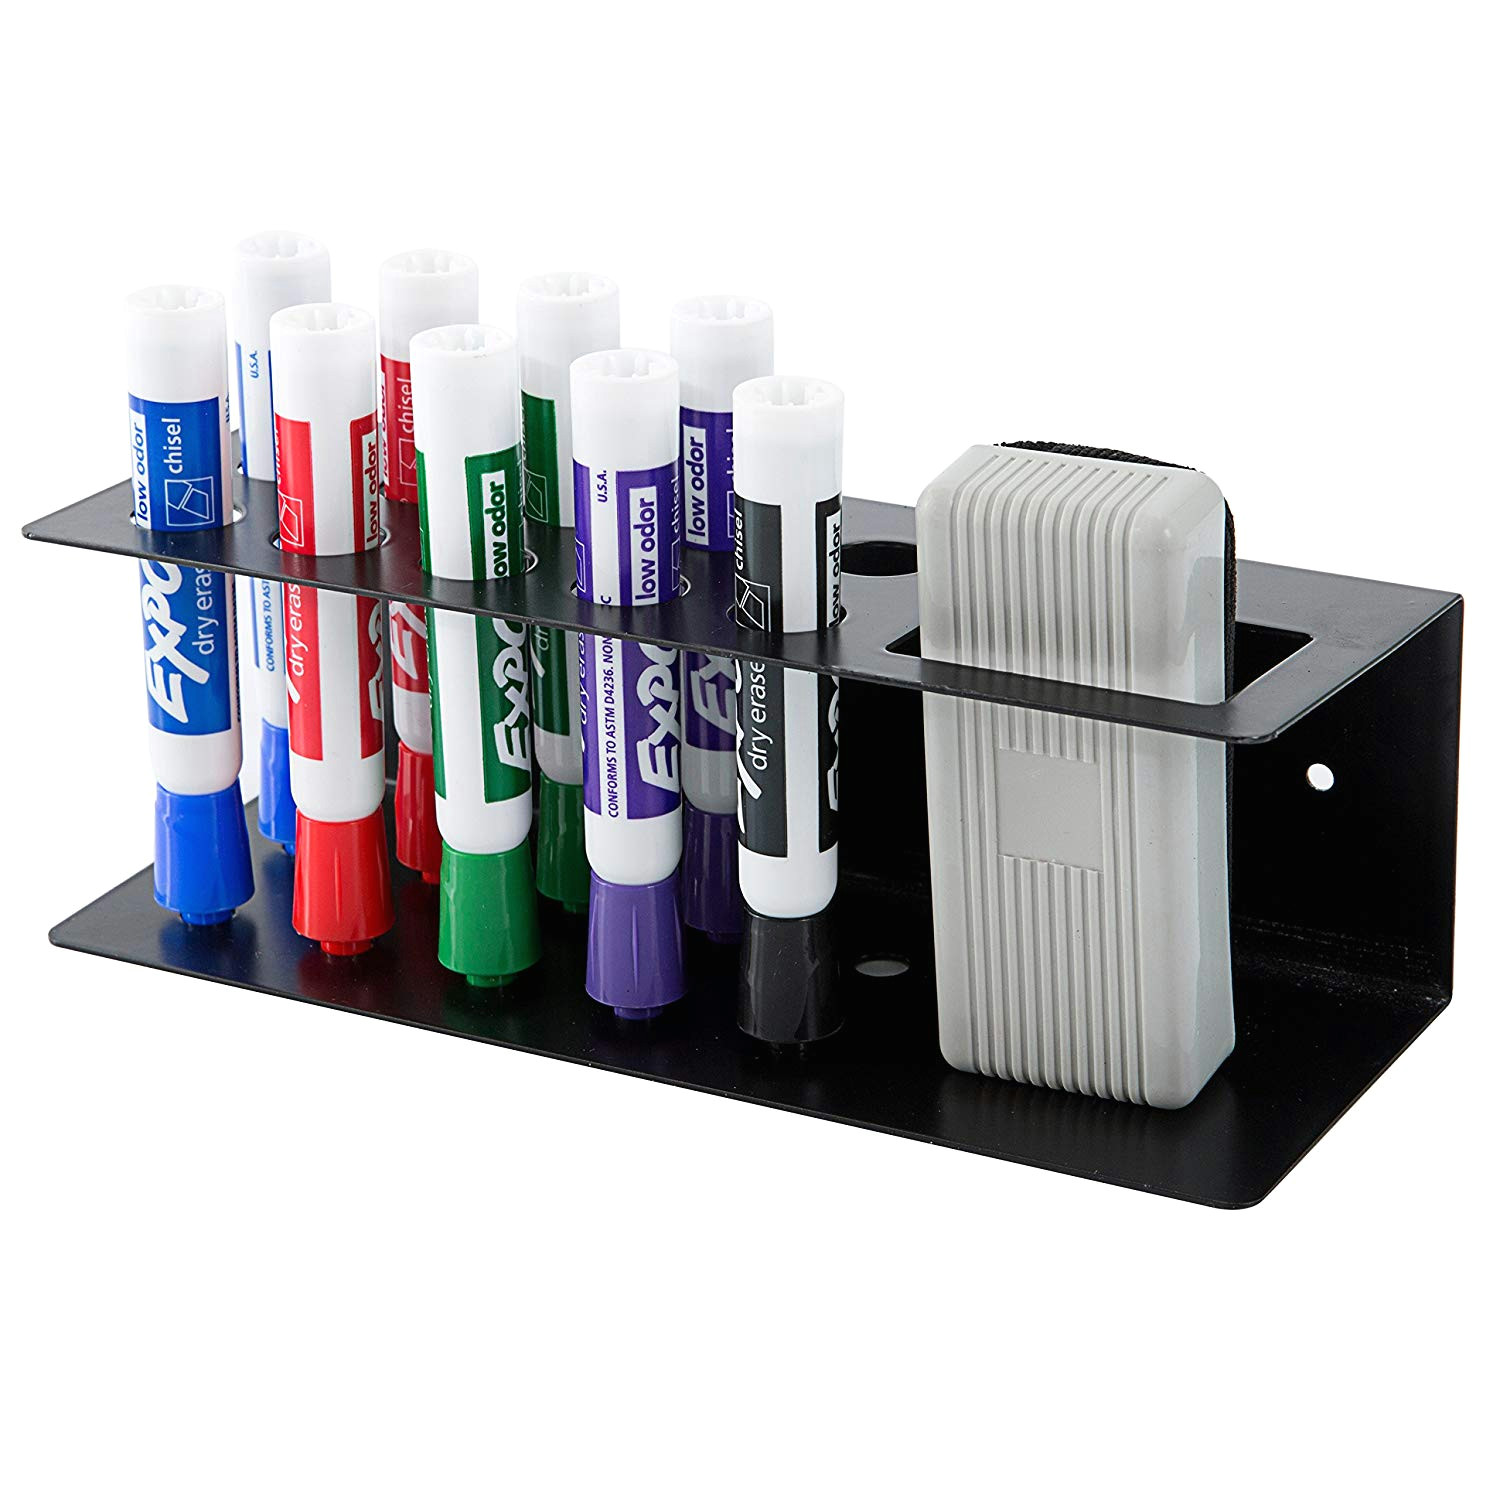 amazon com 10 slot wall mounted metal dry erase marker and eraser holder rack black office products